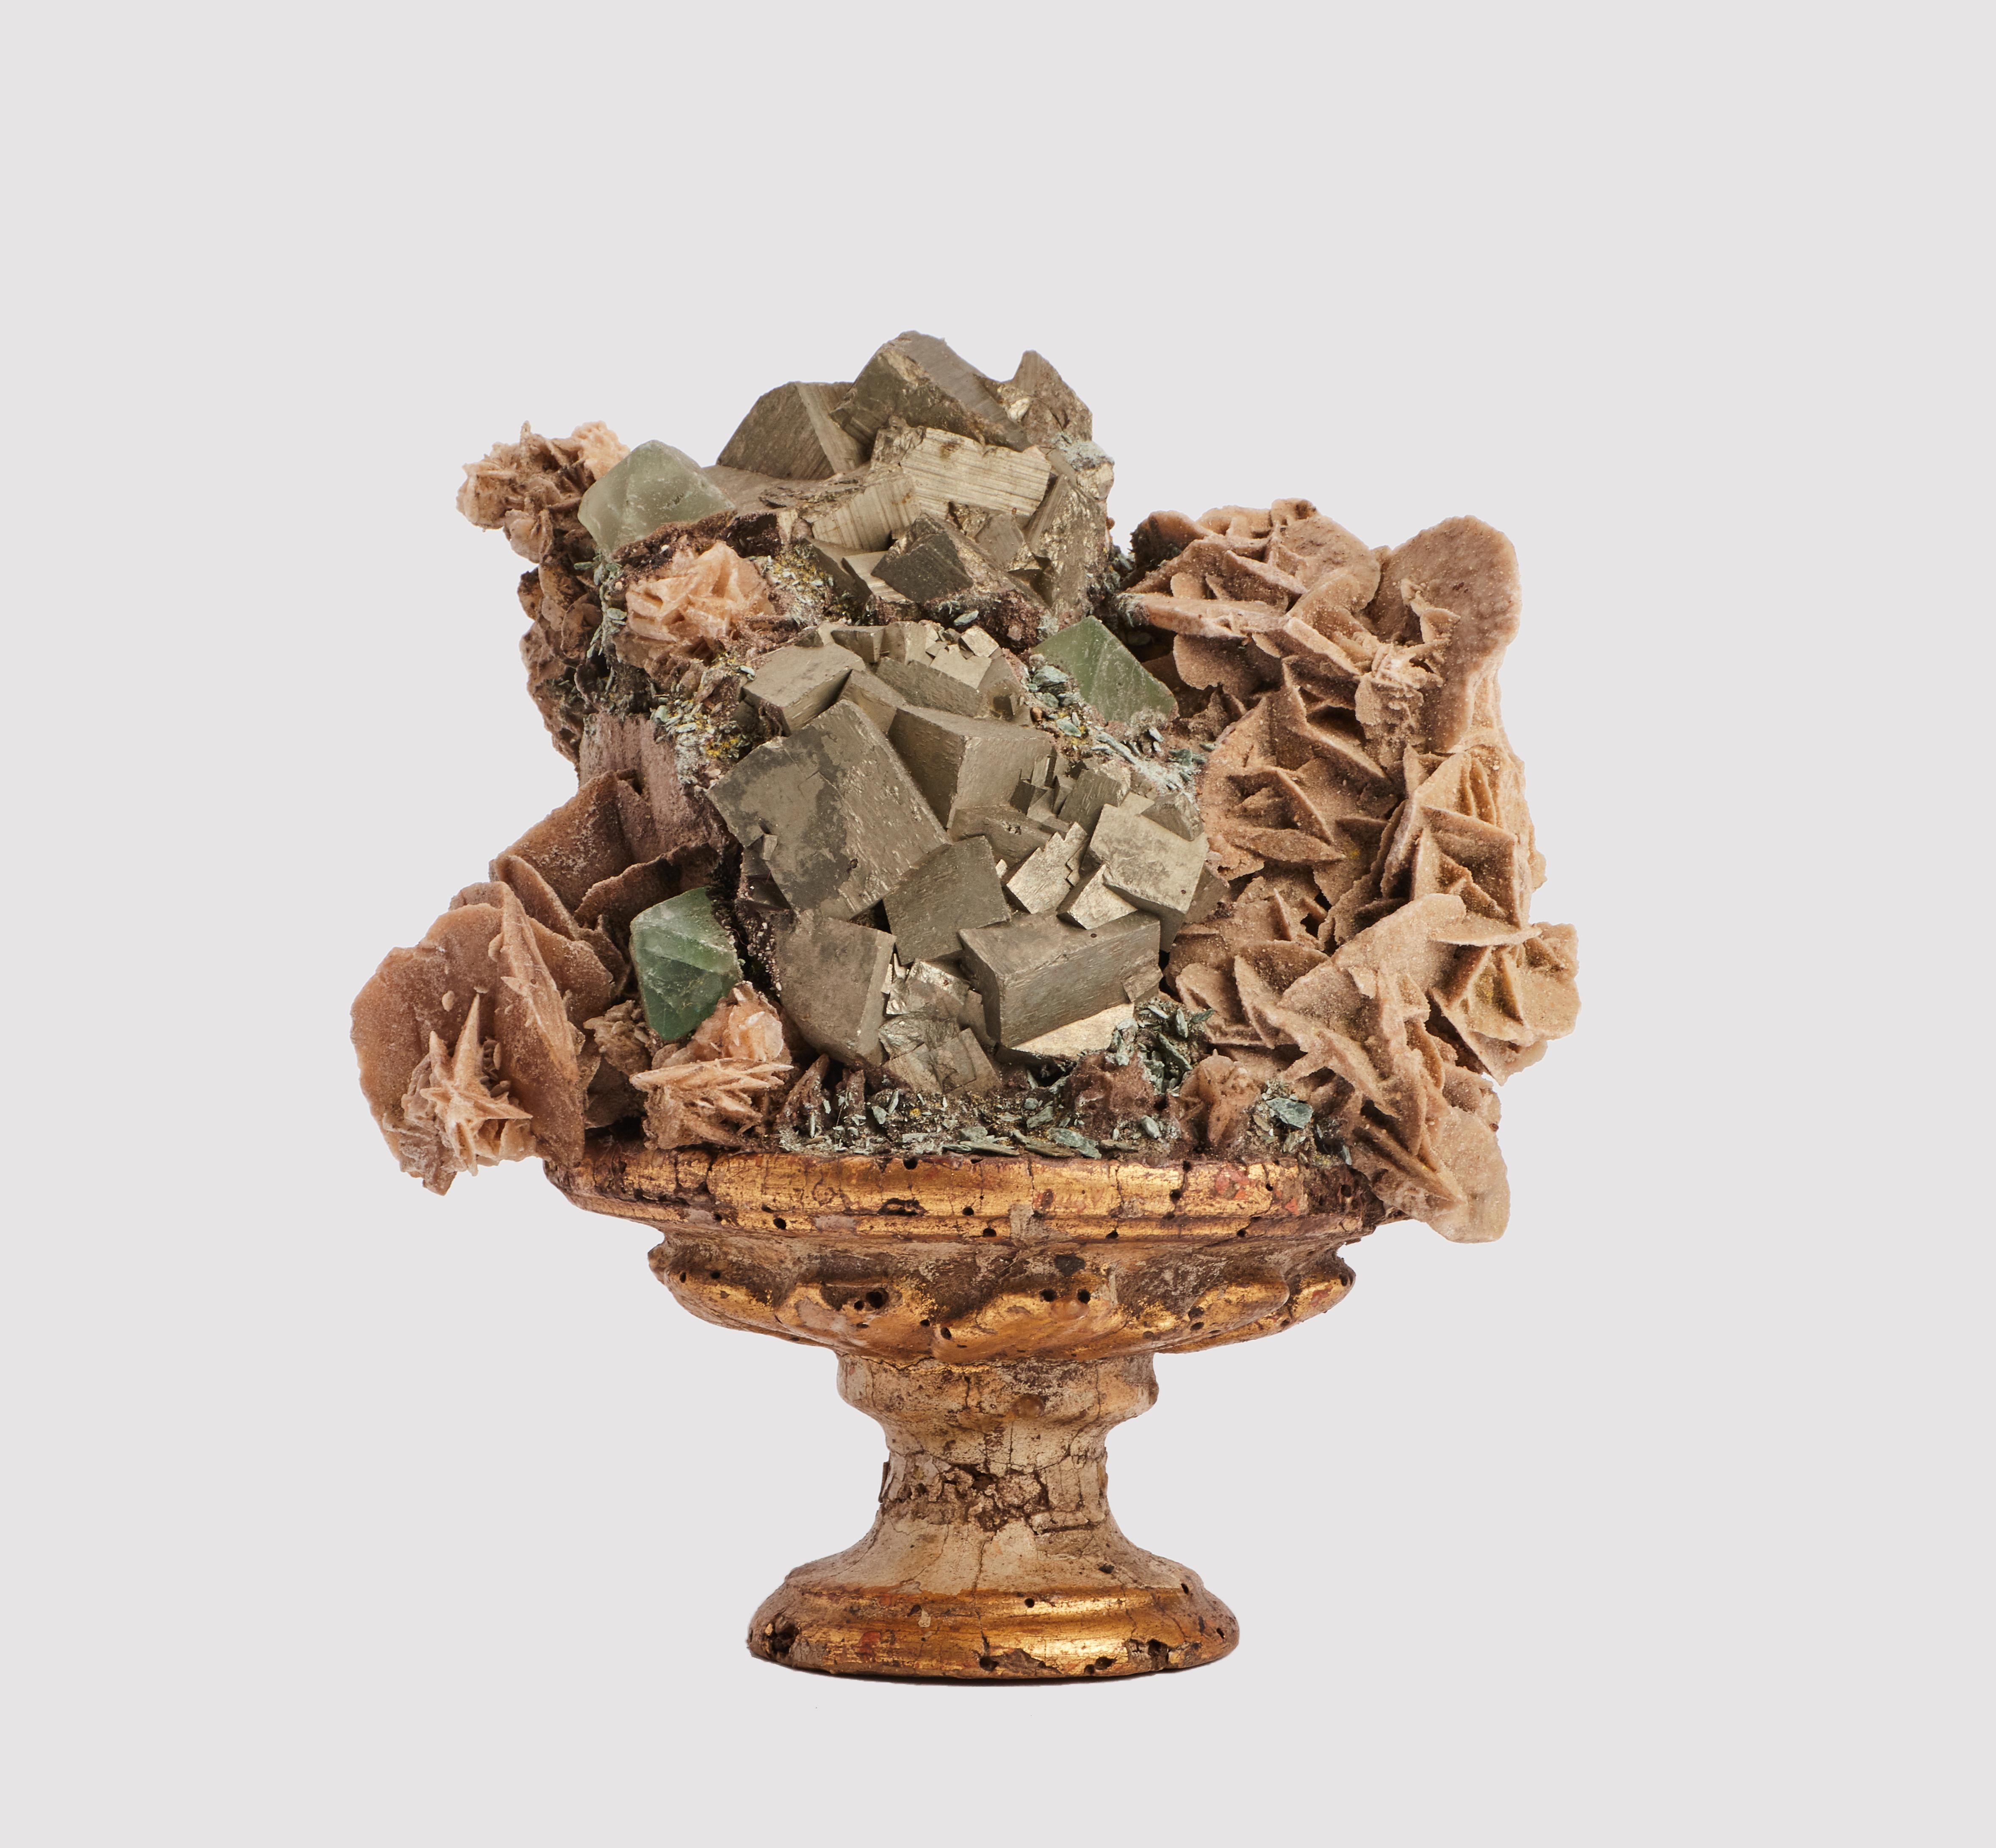 A Naturalia mineral specimen. A fluorite crystals and cubic pyrite cristals mounted over a guild-plated and lacquered wooden base with leaves decoration. Italy, around 1880.